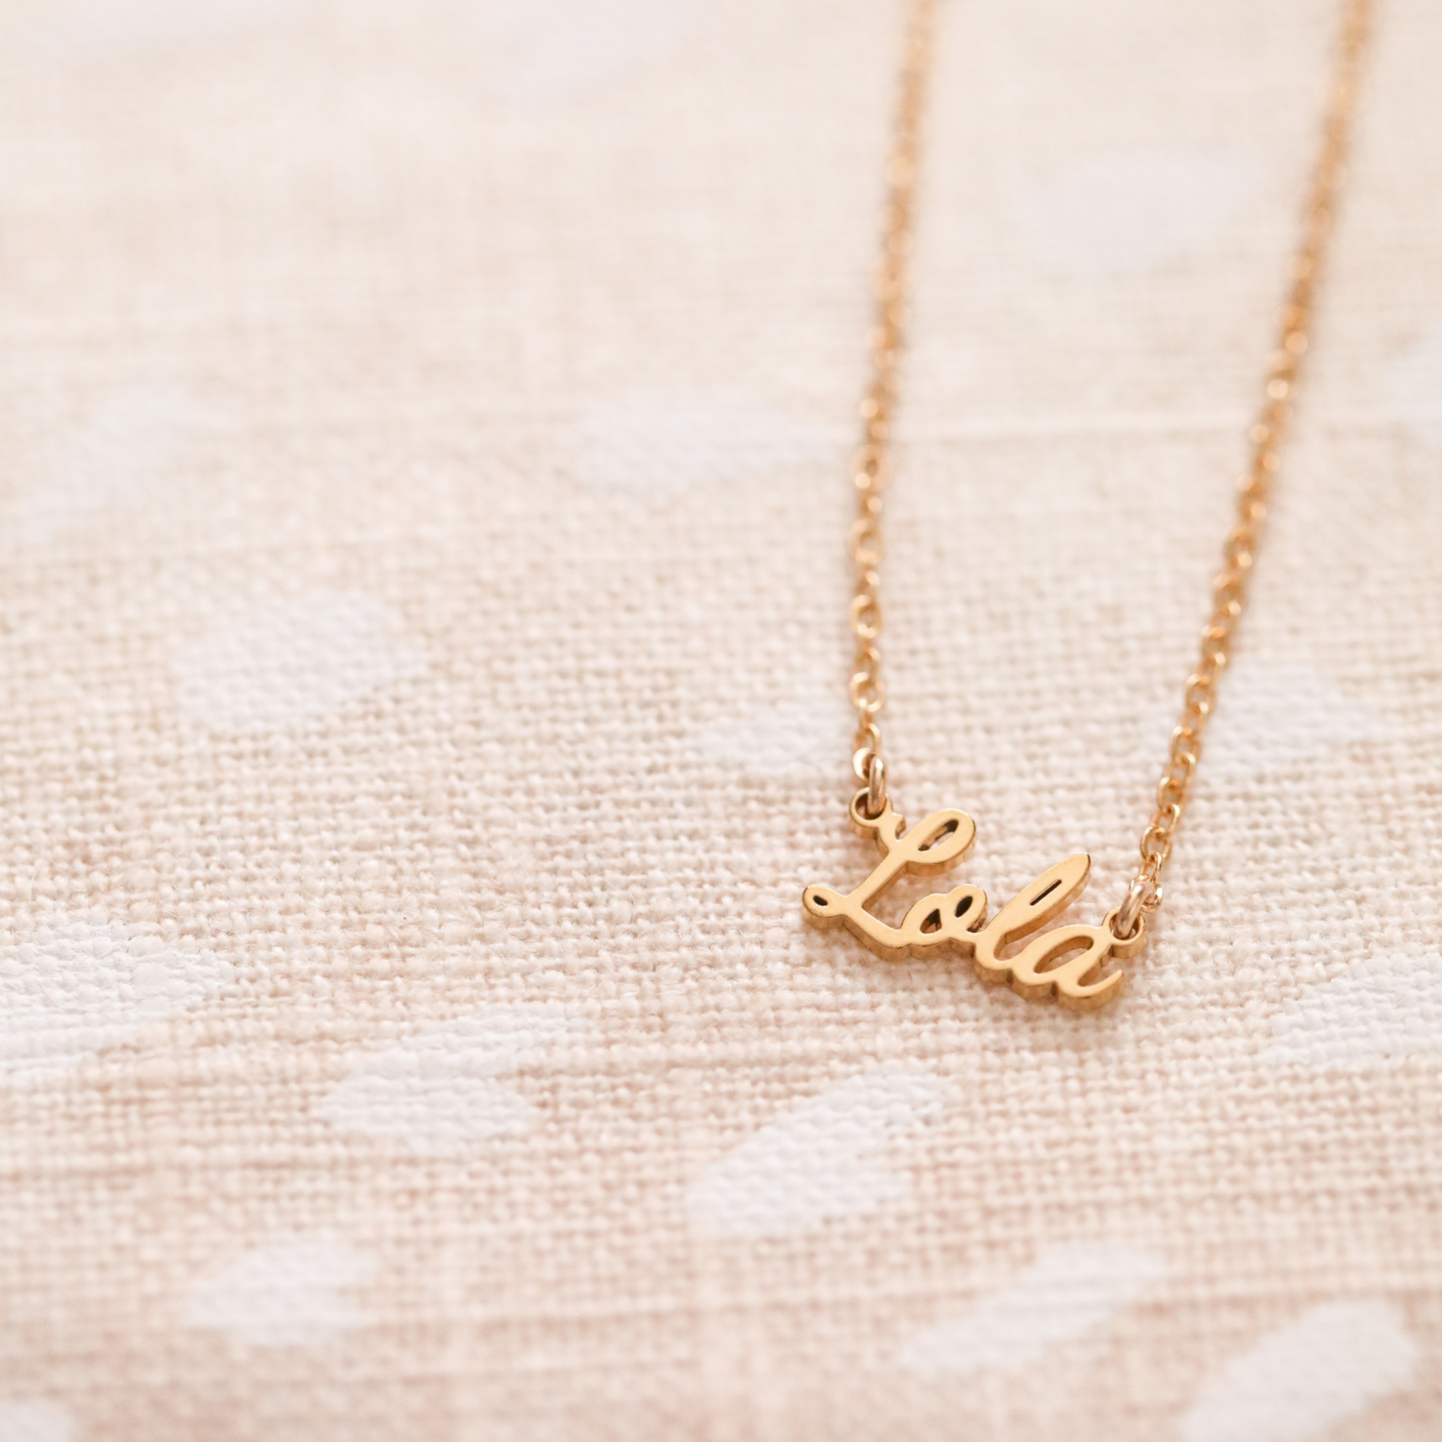 Nameplate Necklace - Cursive font style